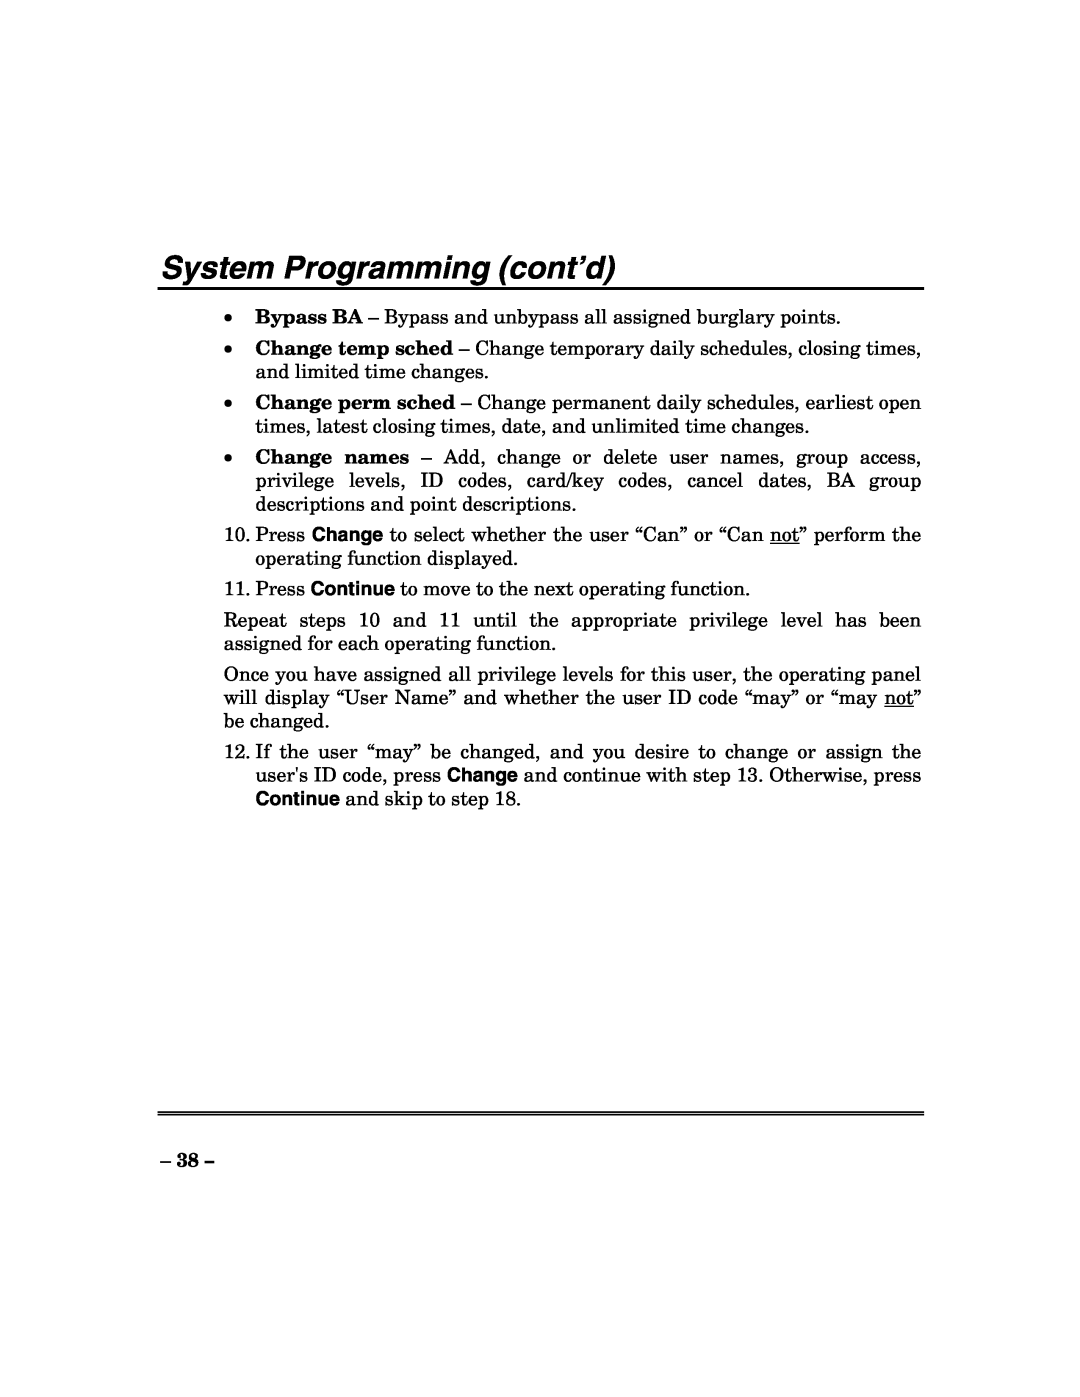 ADT Security Services 200 Plus manual System Programming cont’d 